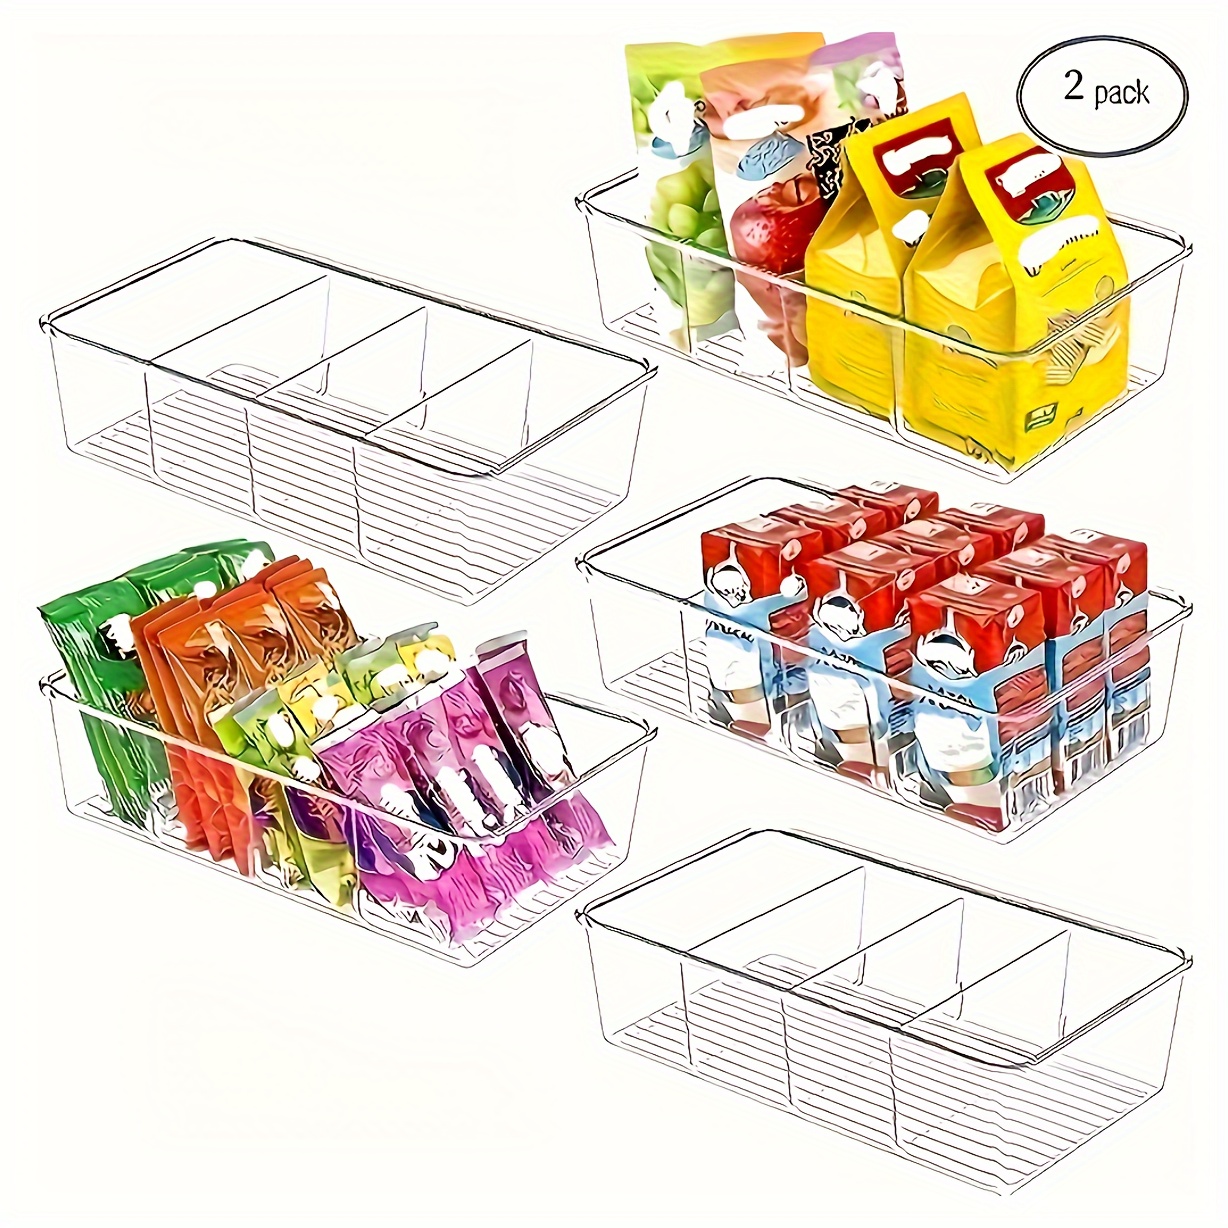 Snack Organizer for Countertop, Wooden Snack Tray and Food Storage  Organizer Bins, Large 5-Compartment Snack Basket for Pantry, Kitchen  Cabinet Pantry